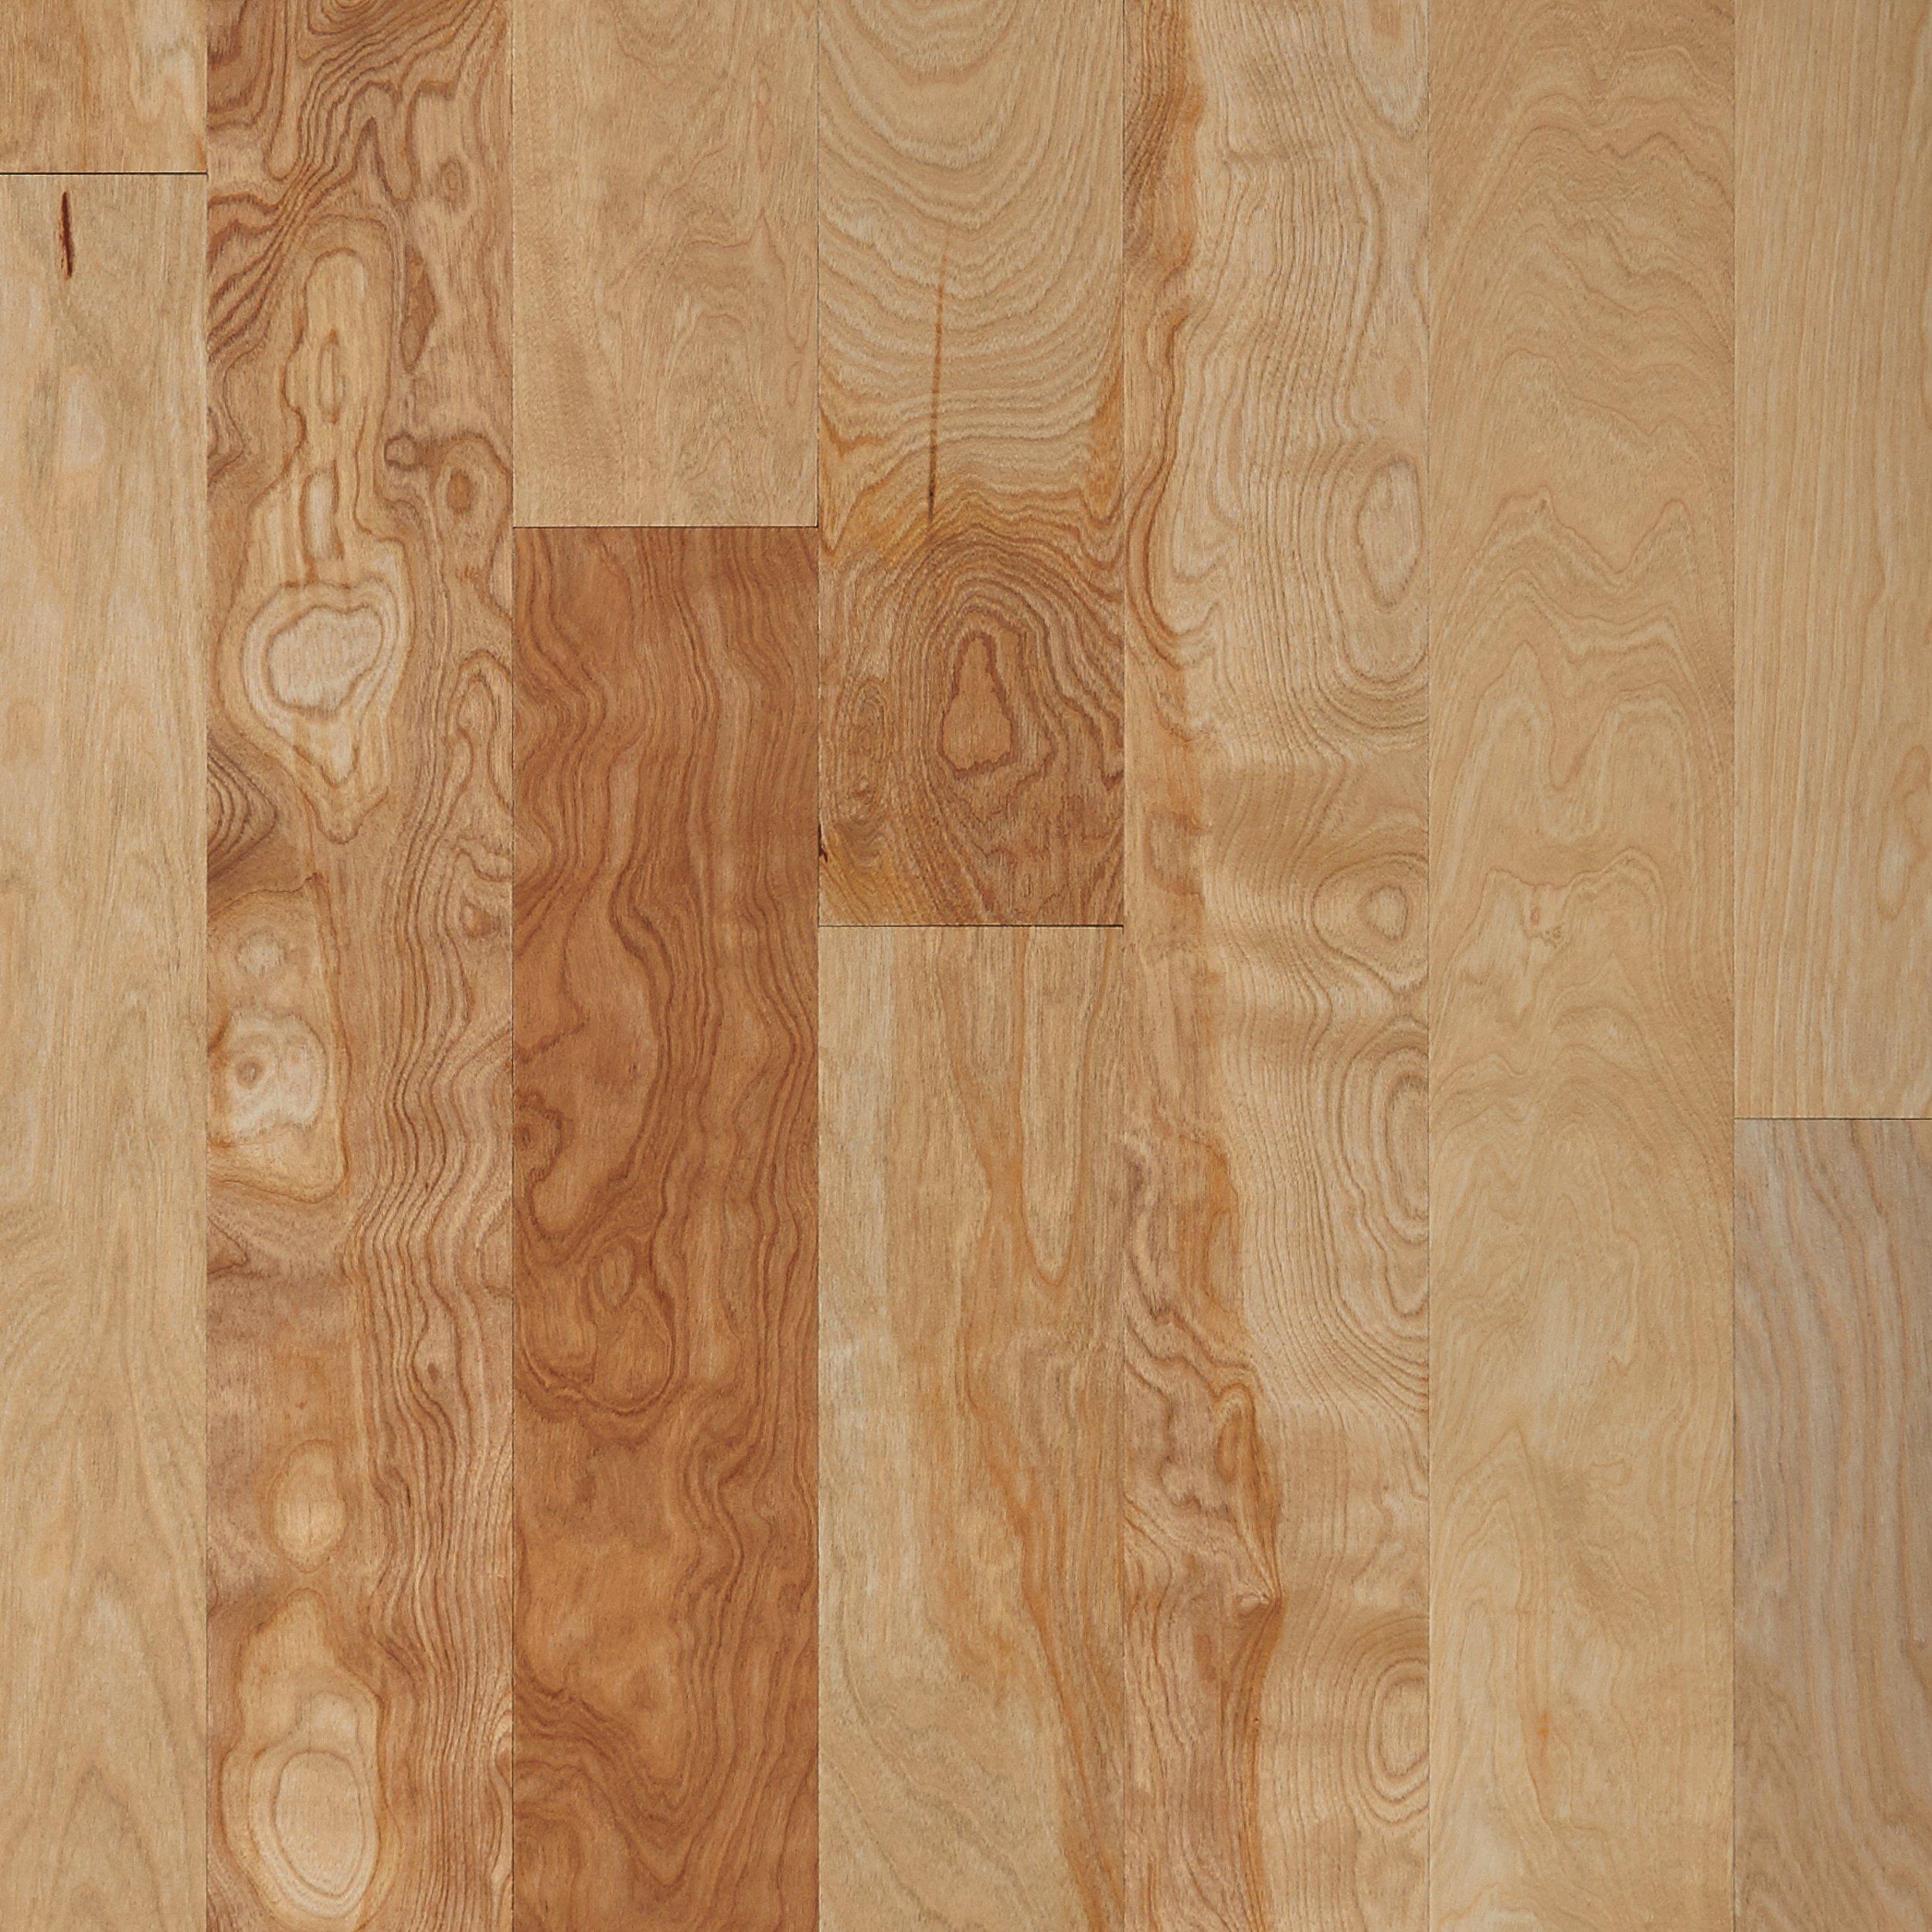 Natural Birch Smooth Engineered Hardwood 3 8in X 5in